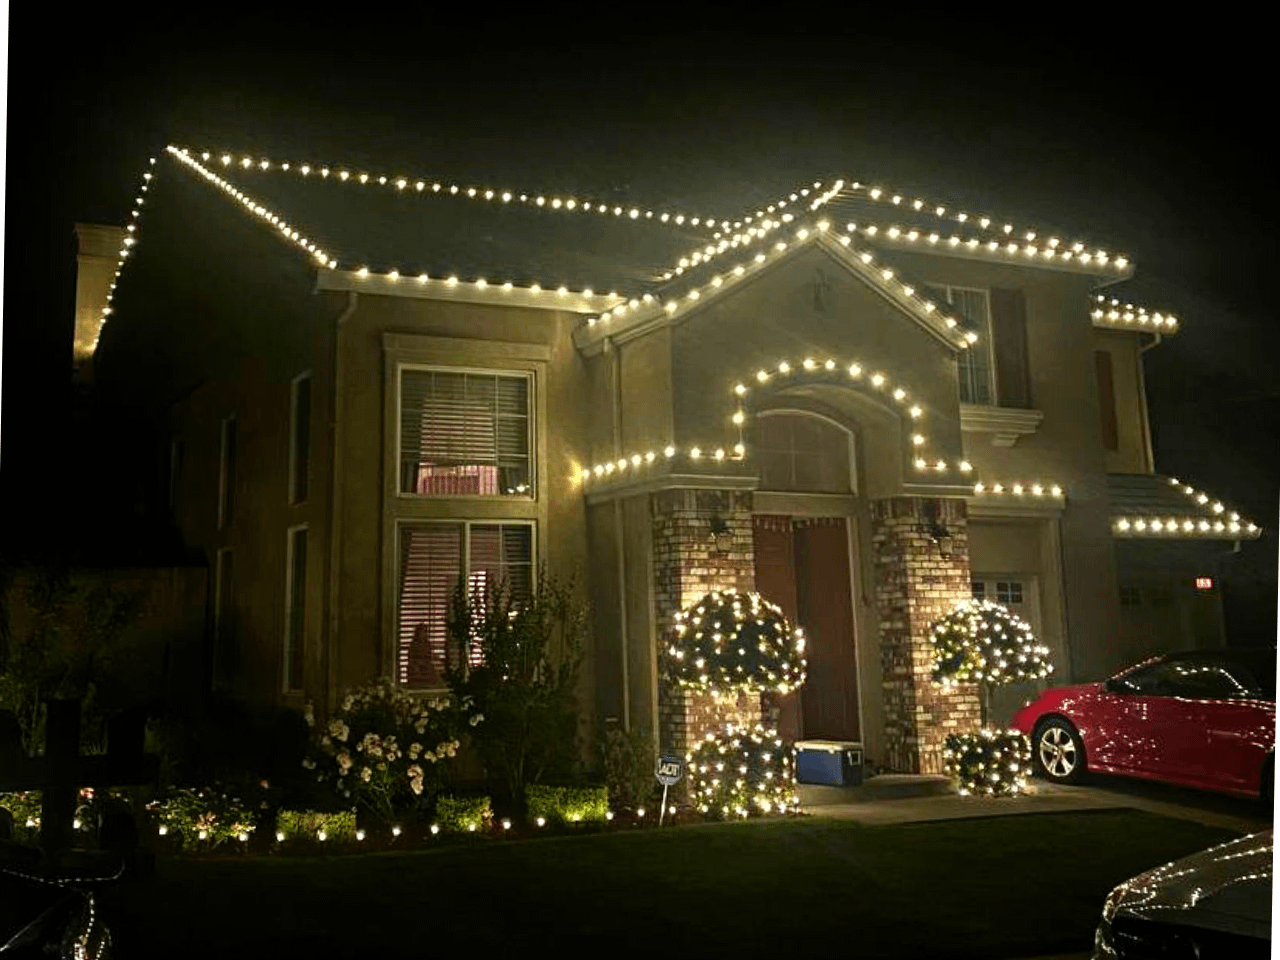 special christmas lights installation on a house